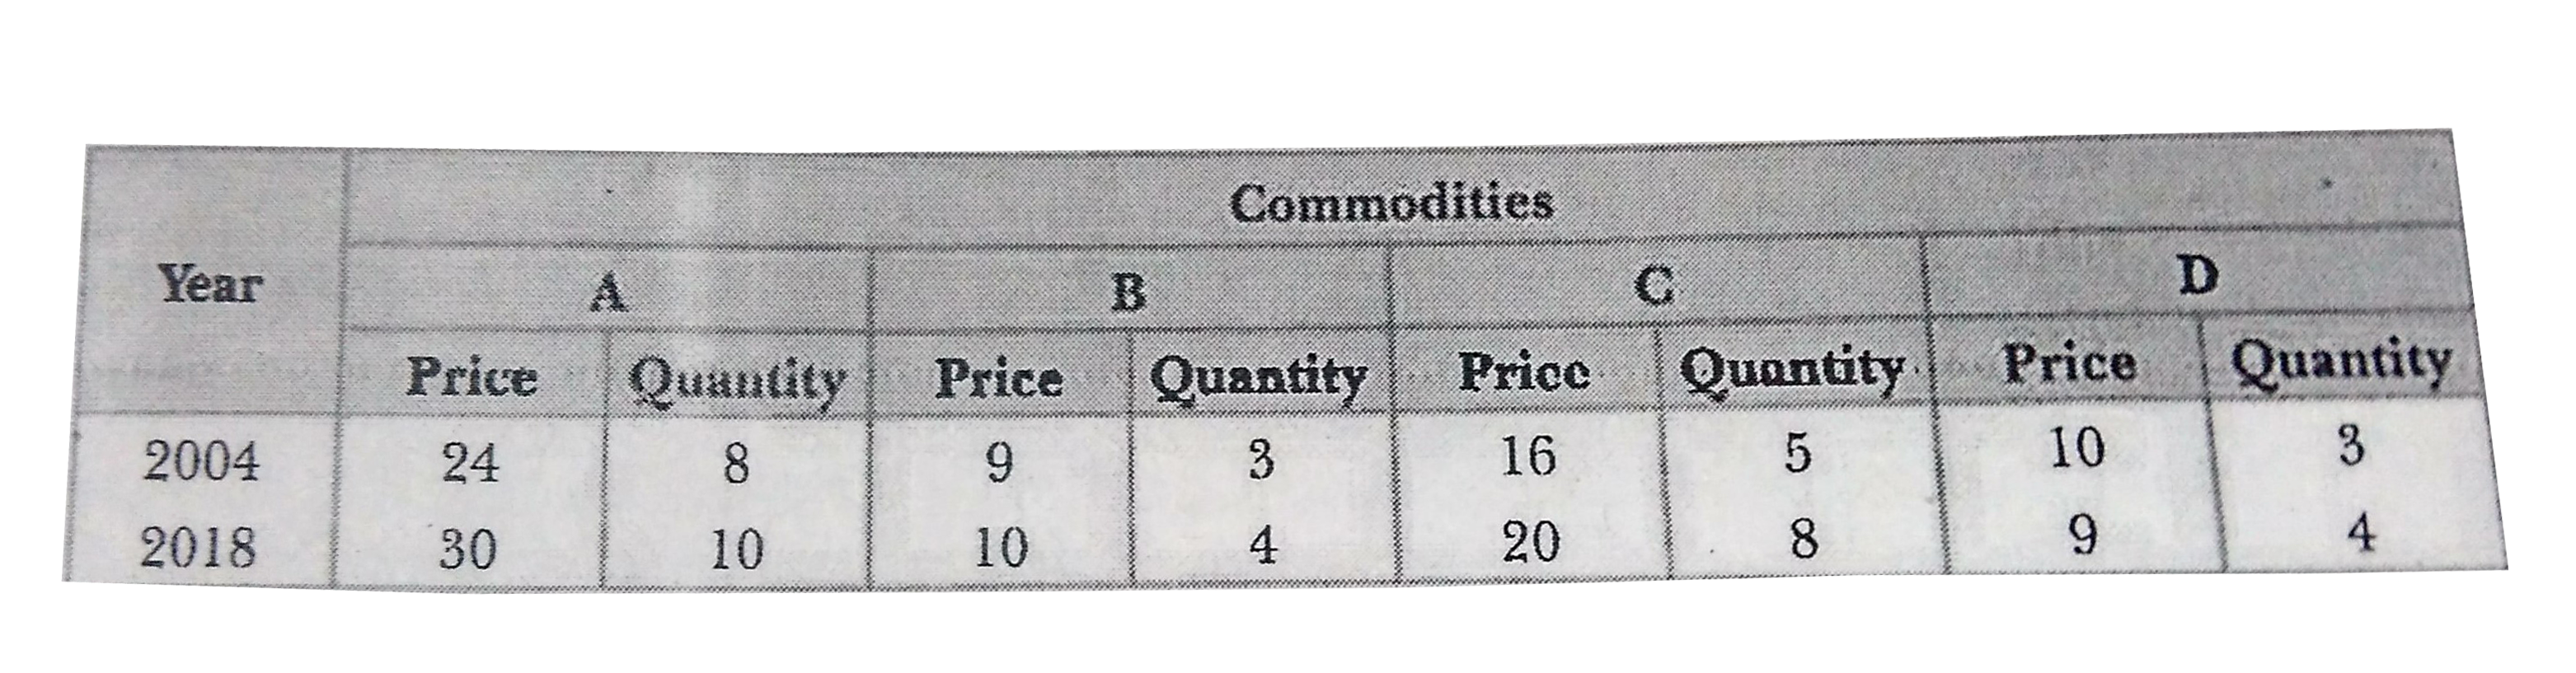 Given the following data and taking 2004 as the base year, construct index of prices using:   (i) Laspeyre's  Method, (ii) Paasche's Method, and (iii) Fisher's Method.